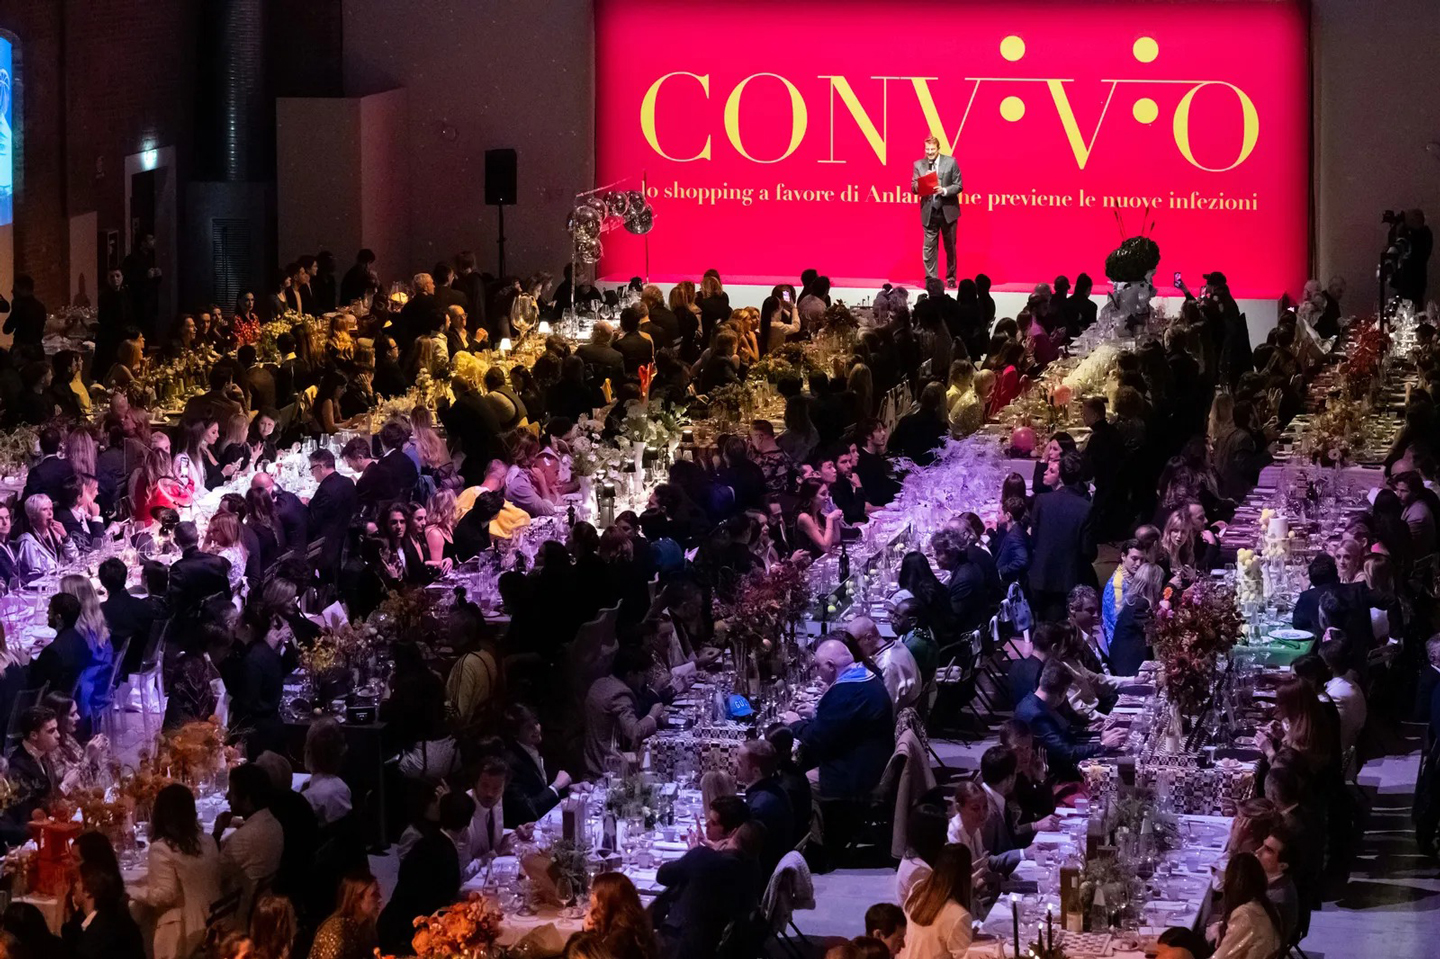 An exclusive Charity Dinner Gala was held on 8 November to celebrate Convivio’s big comeback